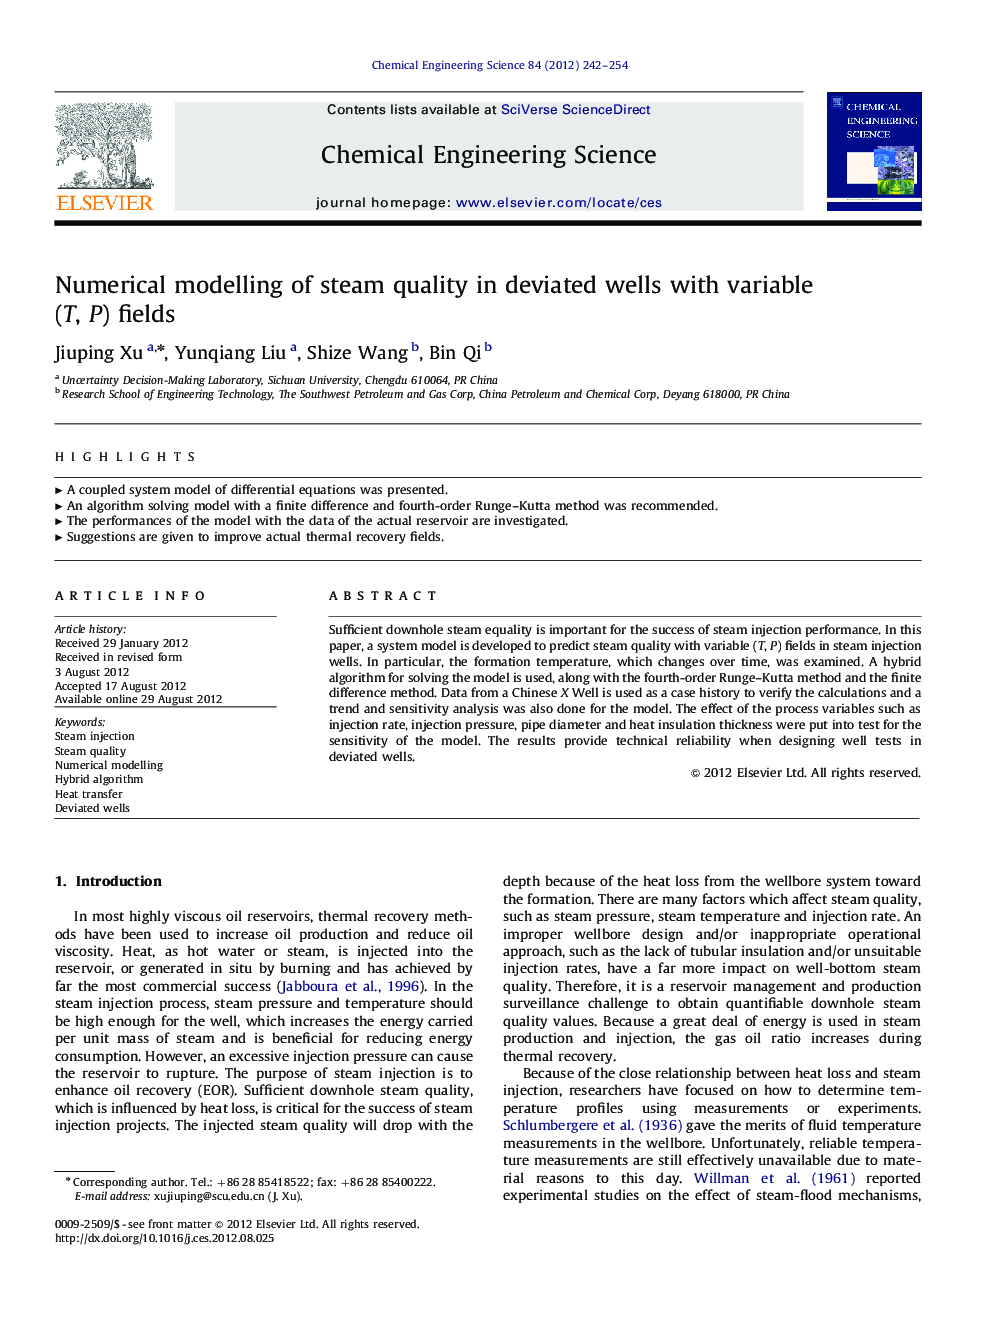 Numerical modelling of steam quality in deviated wells with variable (T, P) fields